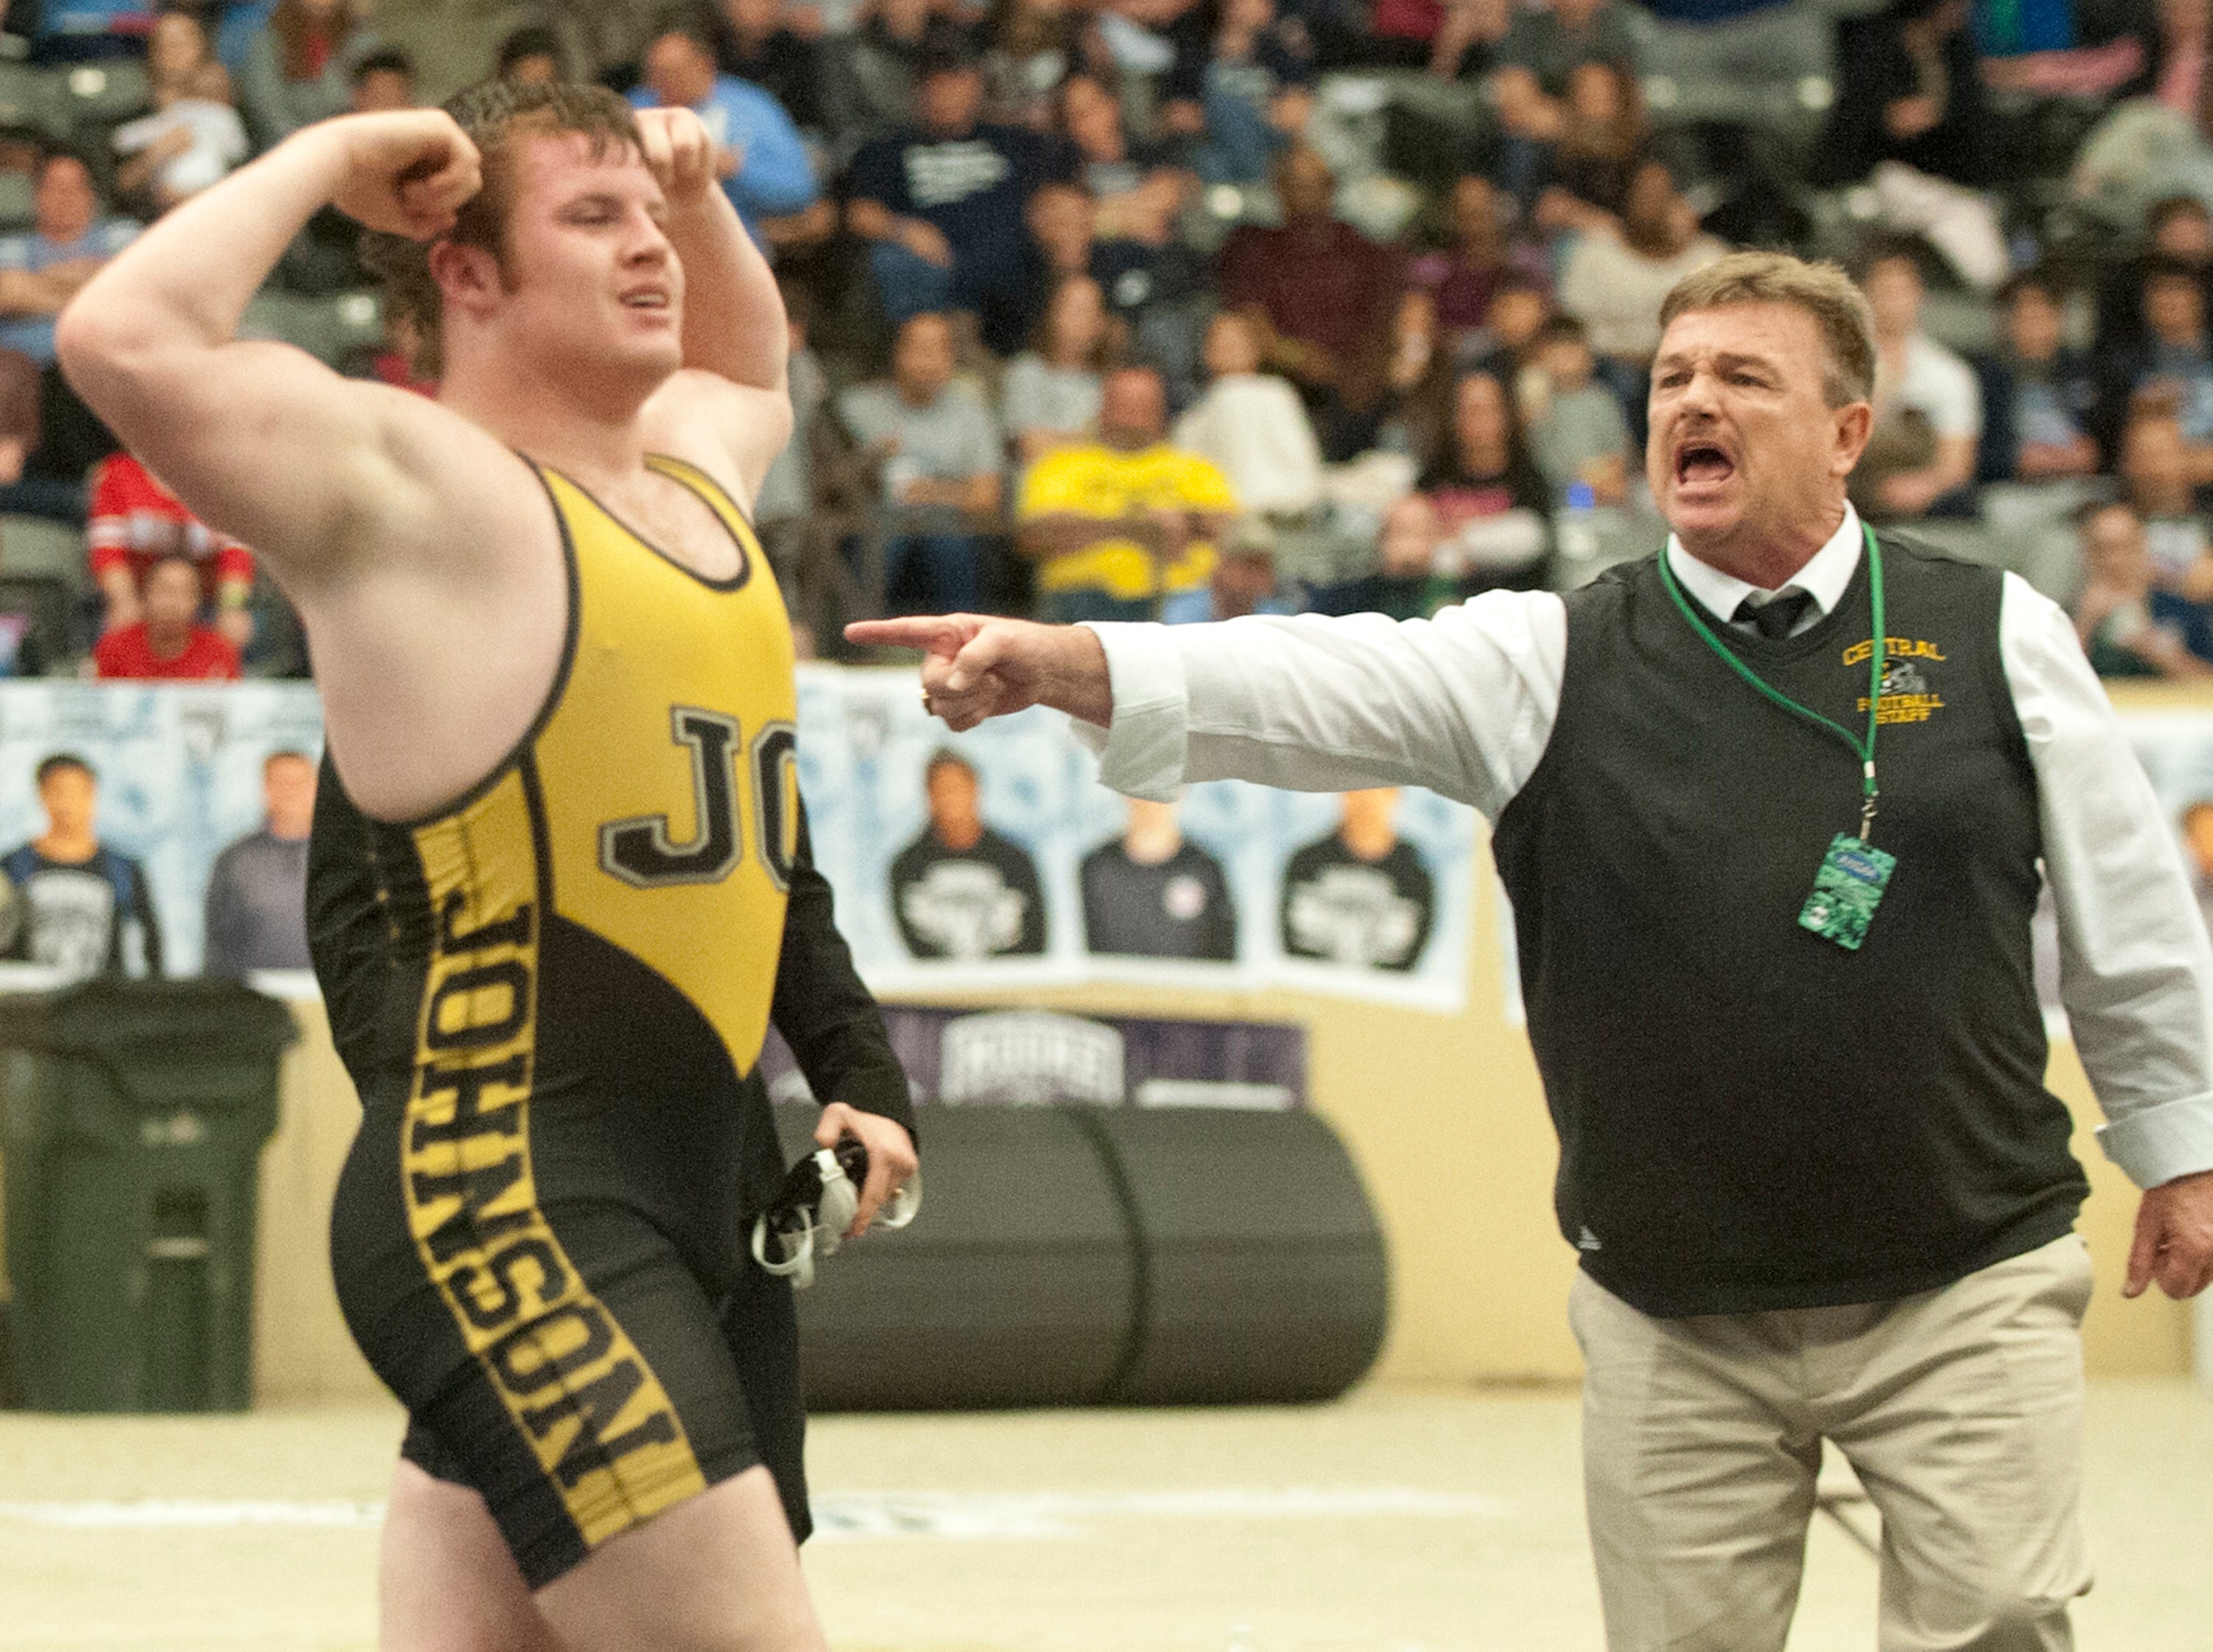 Johnson Central's Matthew Horn raises his arms up in triumph after defeating St. Xavier's Ben DePrest 3-2 in a tie-breaker of the 195 lb. contest of the KHSAA wrestling championship,16 February 2019